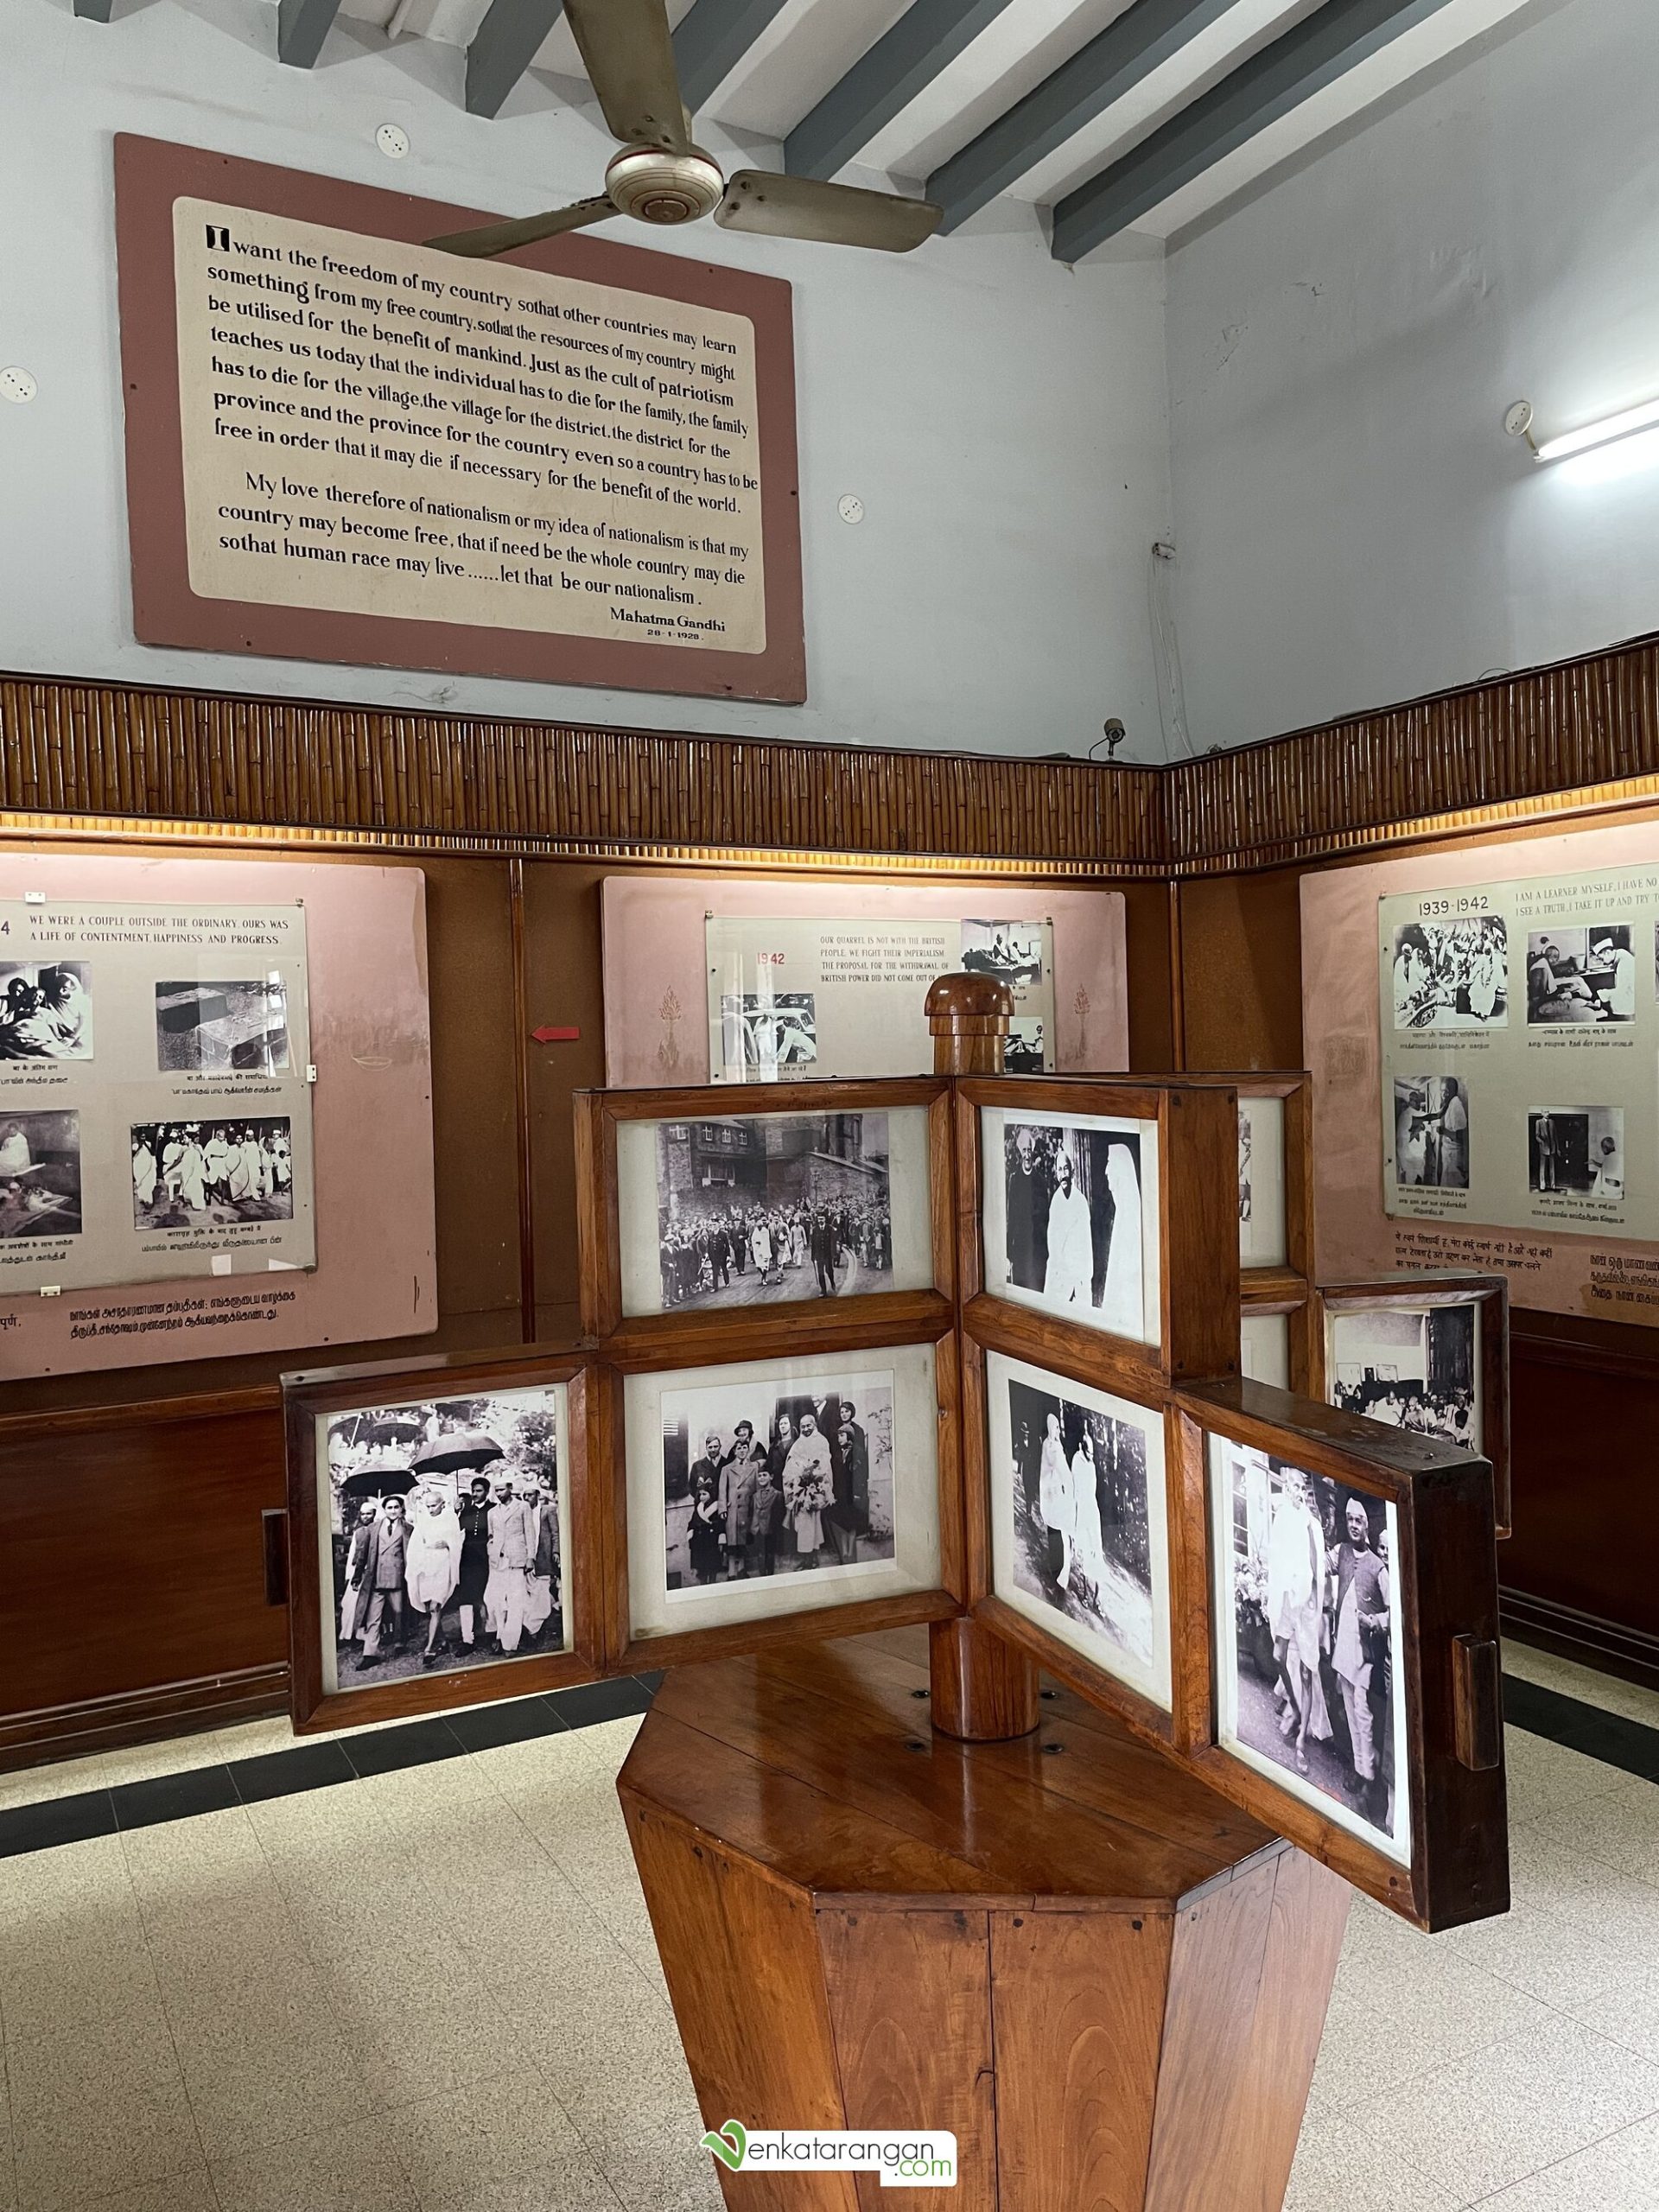 Gandhiji's quotes and pictures